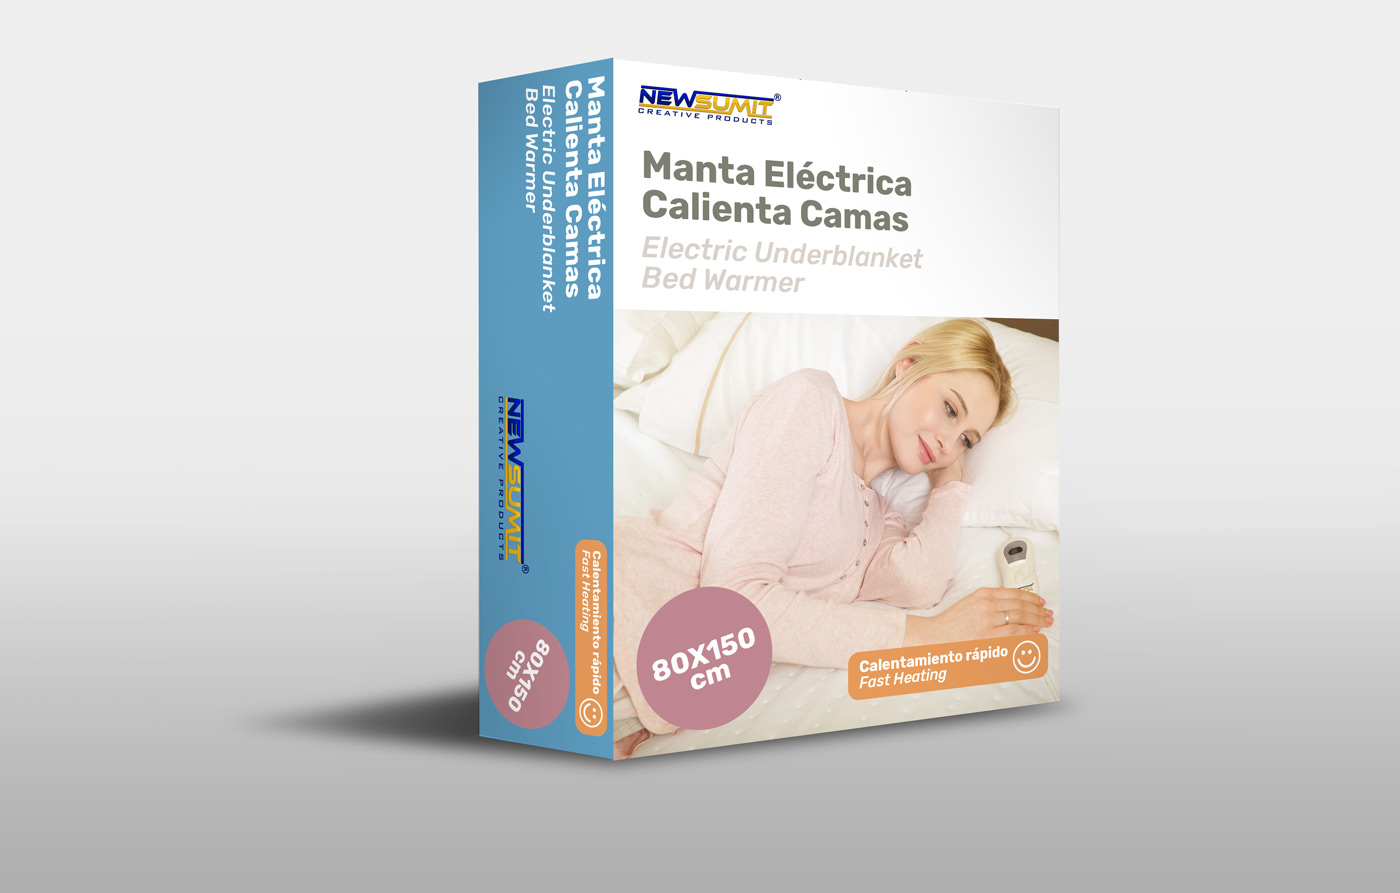 Creative and graphic design portfolio of boxes and packaging for electric blanket heats beds